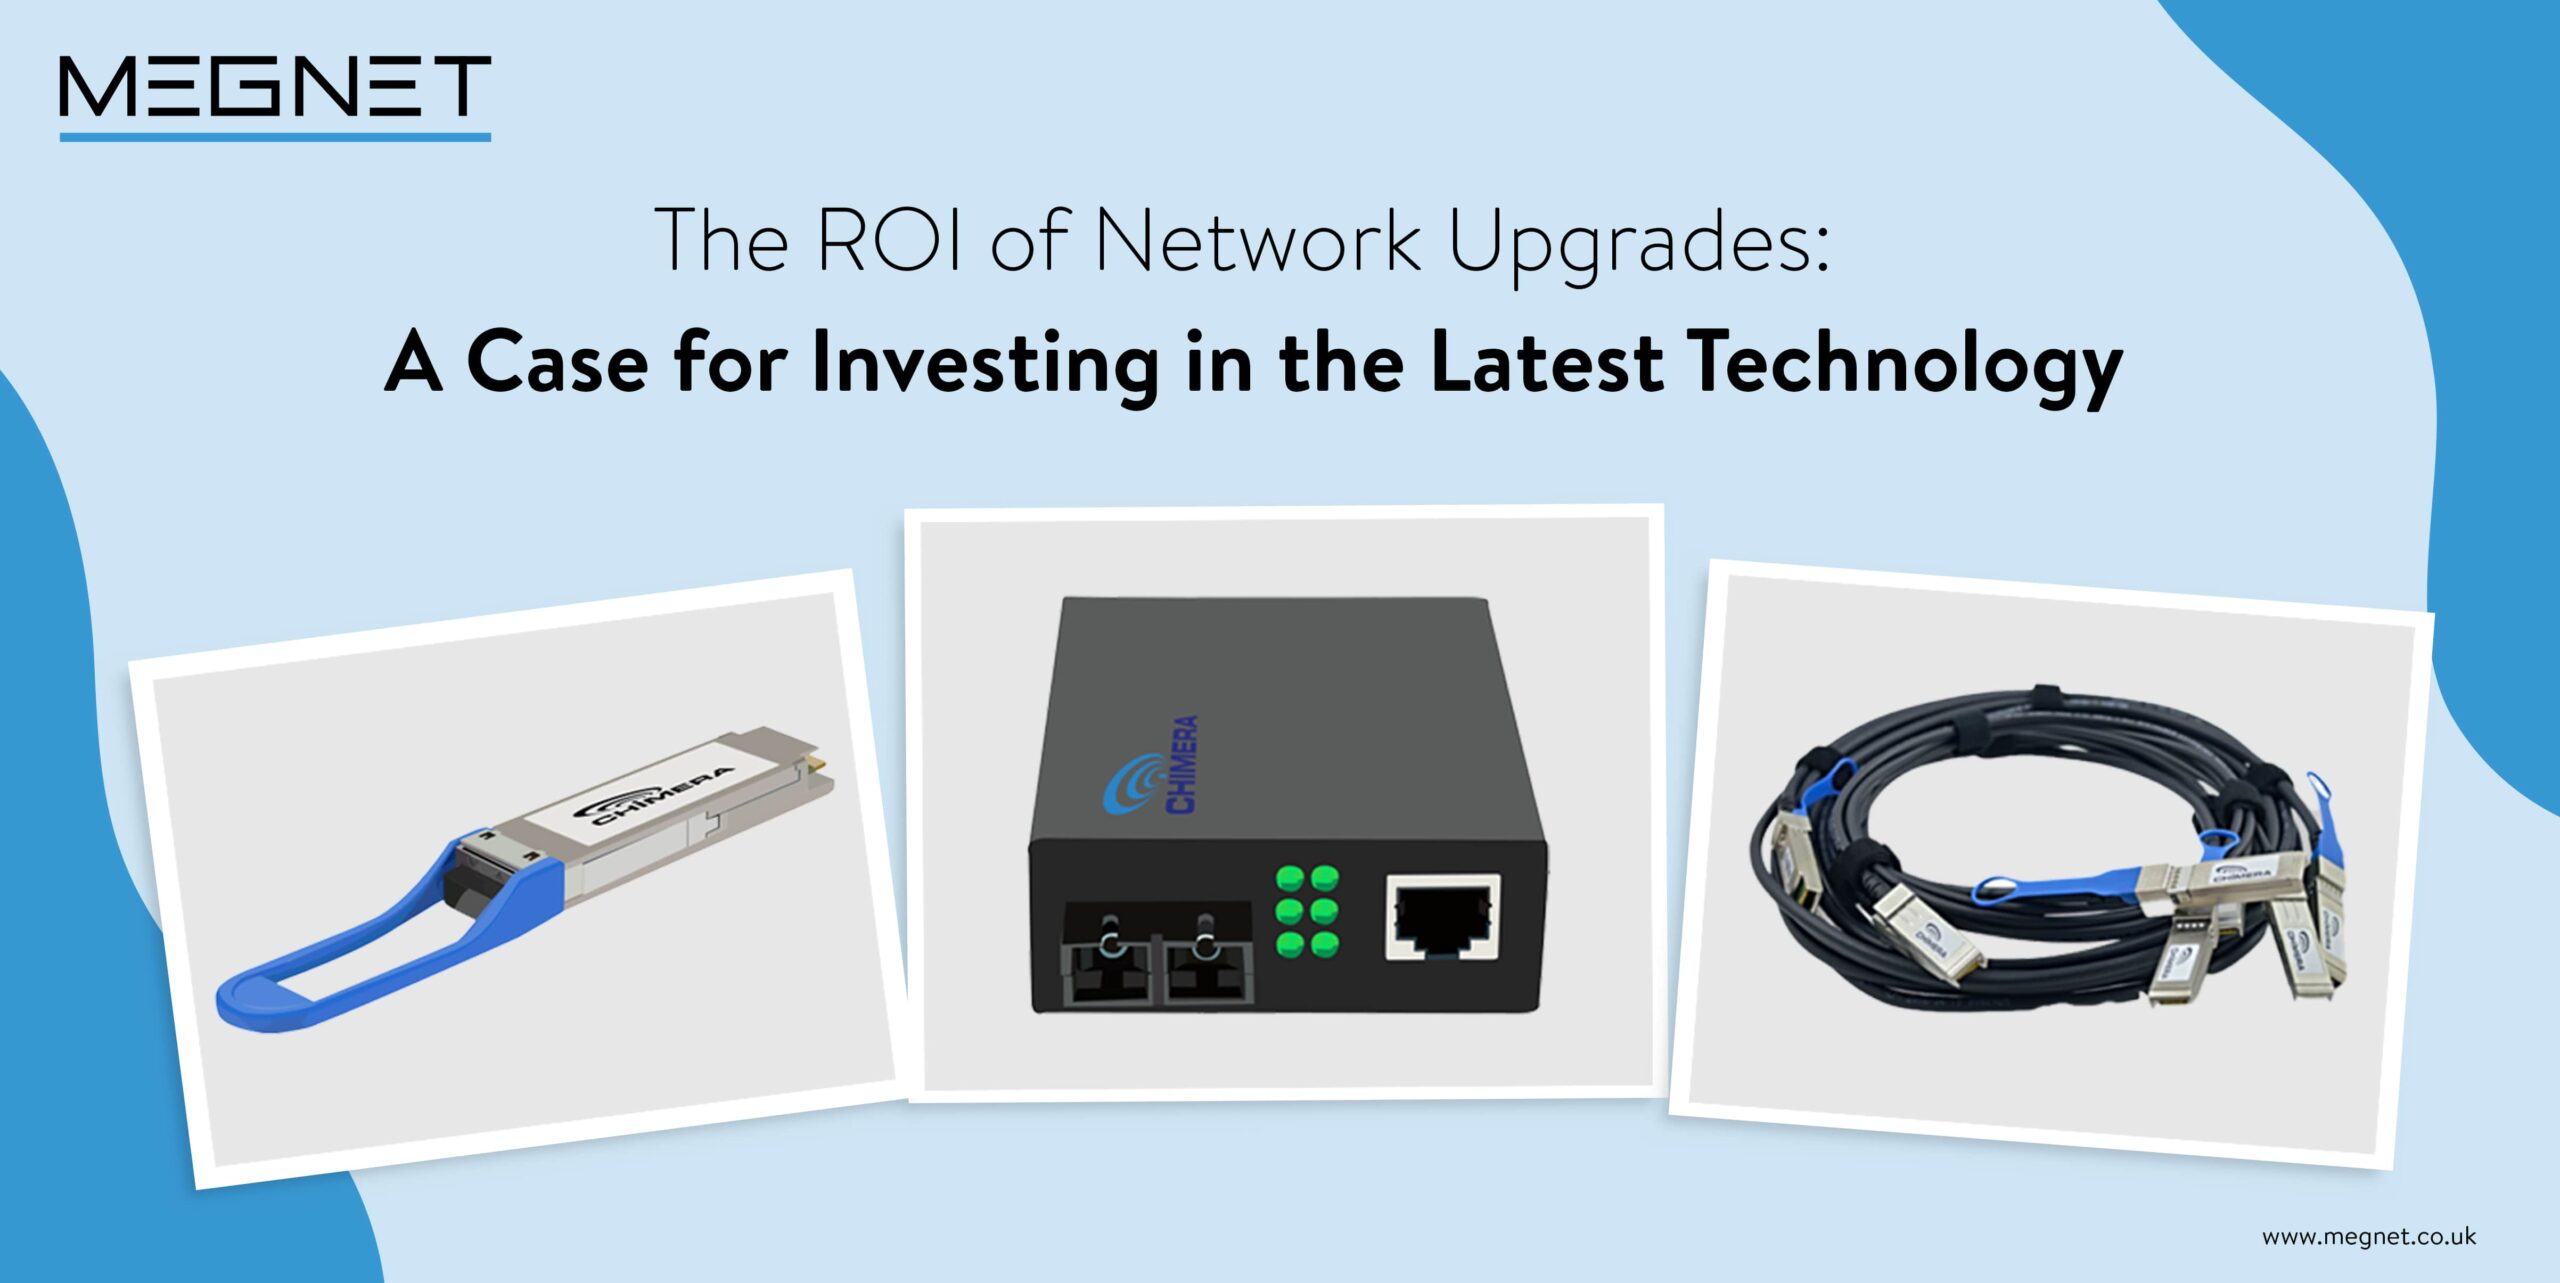 Networking Products | Networking Accessories | Network Upgrades